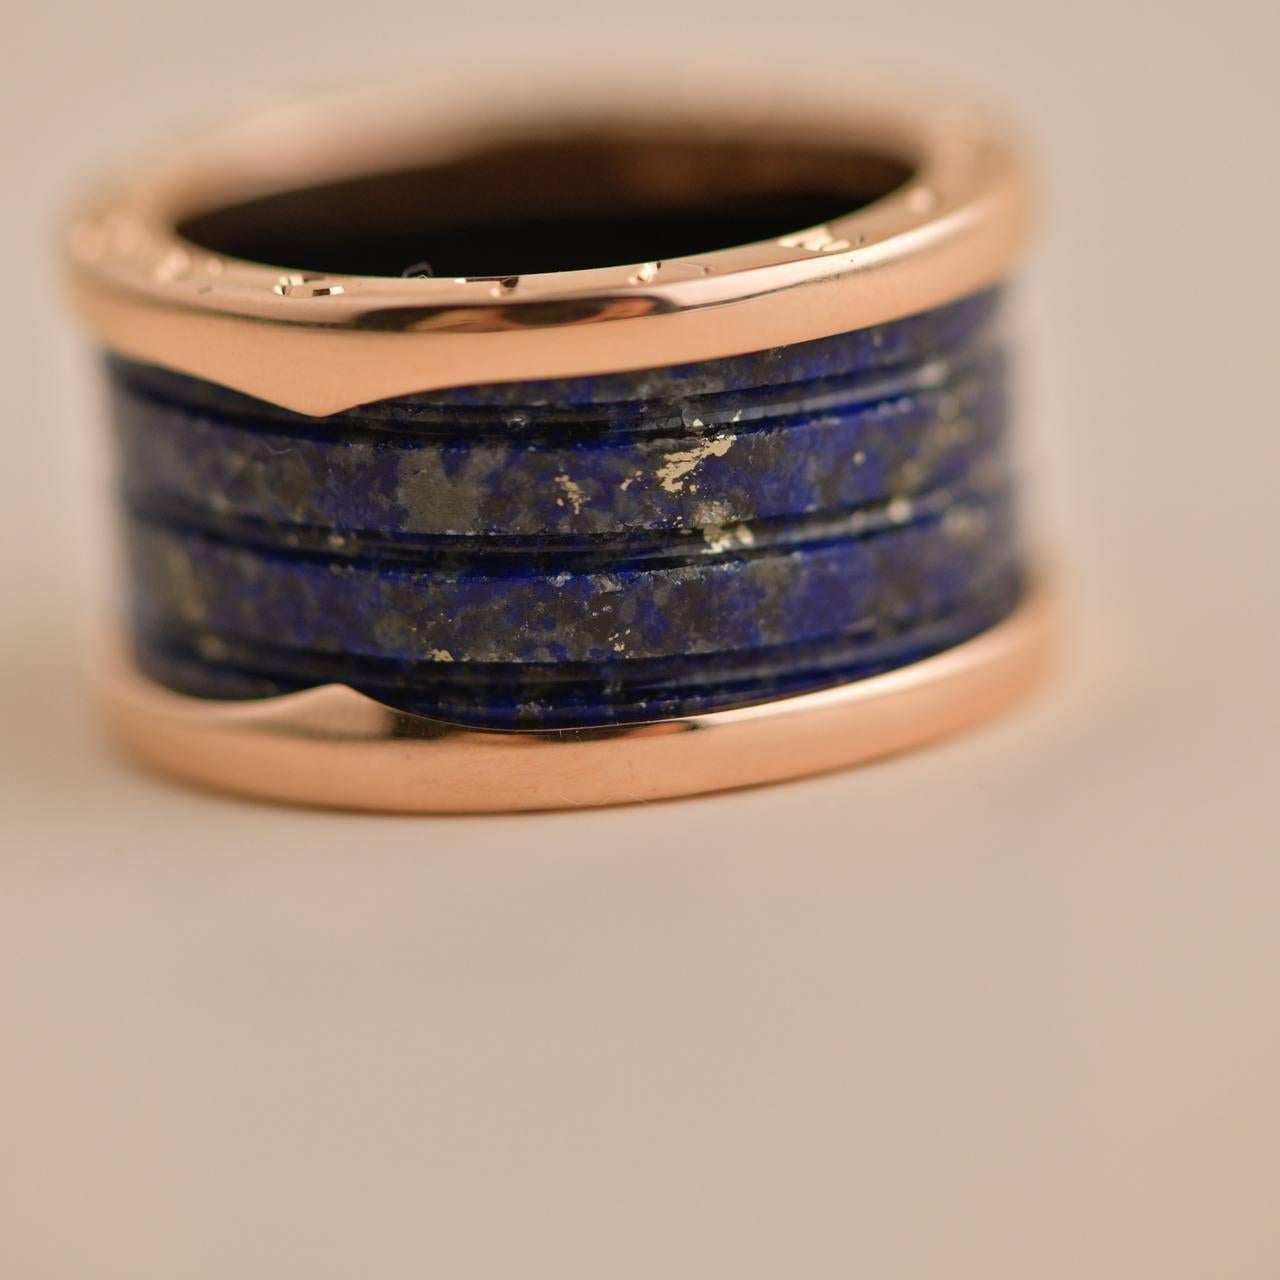 SKU	AT-2215
Model	B.Zero1
Serial Number	A8****
Metal	18k Rose Gold
Stones	Lapis Lazuli
Weight	7.2 g
Ring Size	55 (UK: M / US: 6 1/2)
Condition	Excellent
__________________________________

If you are interested in any of our previously sold pieces,